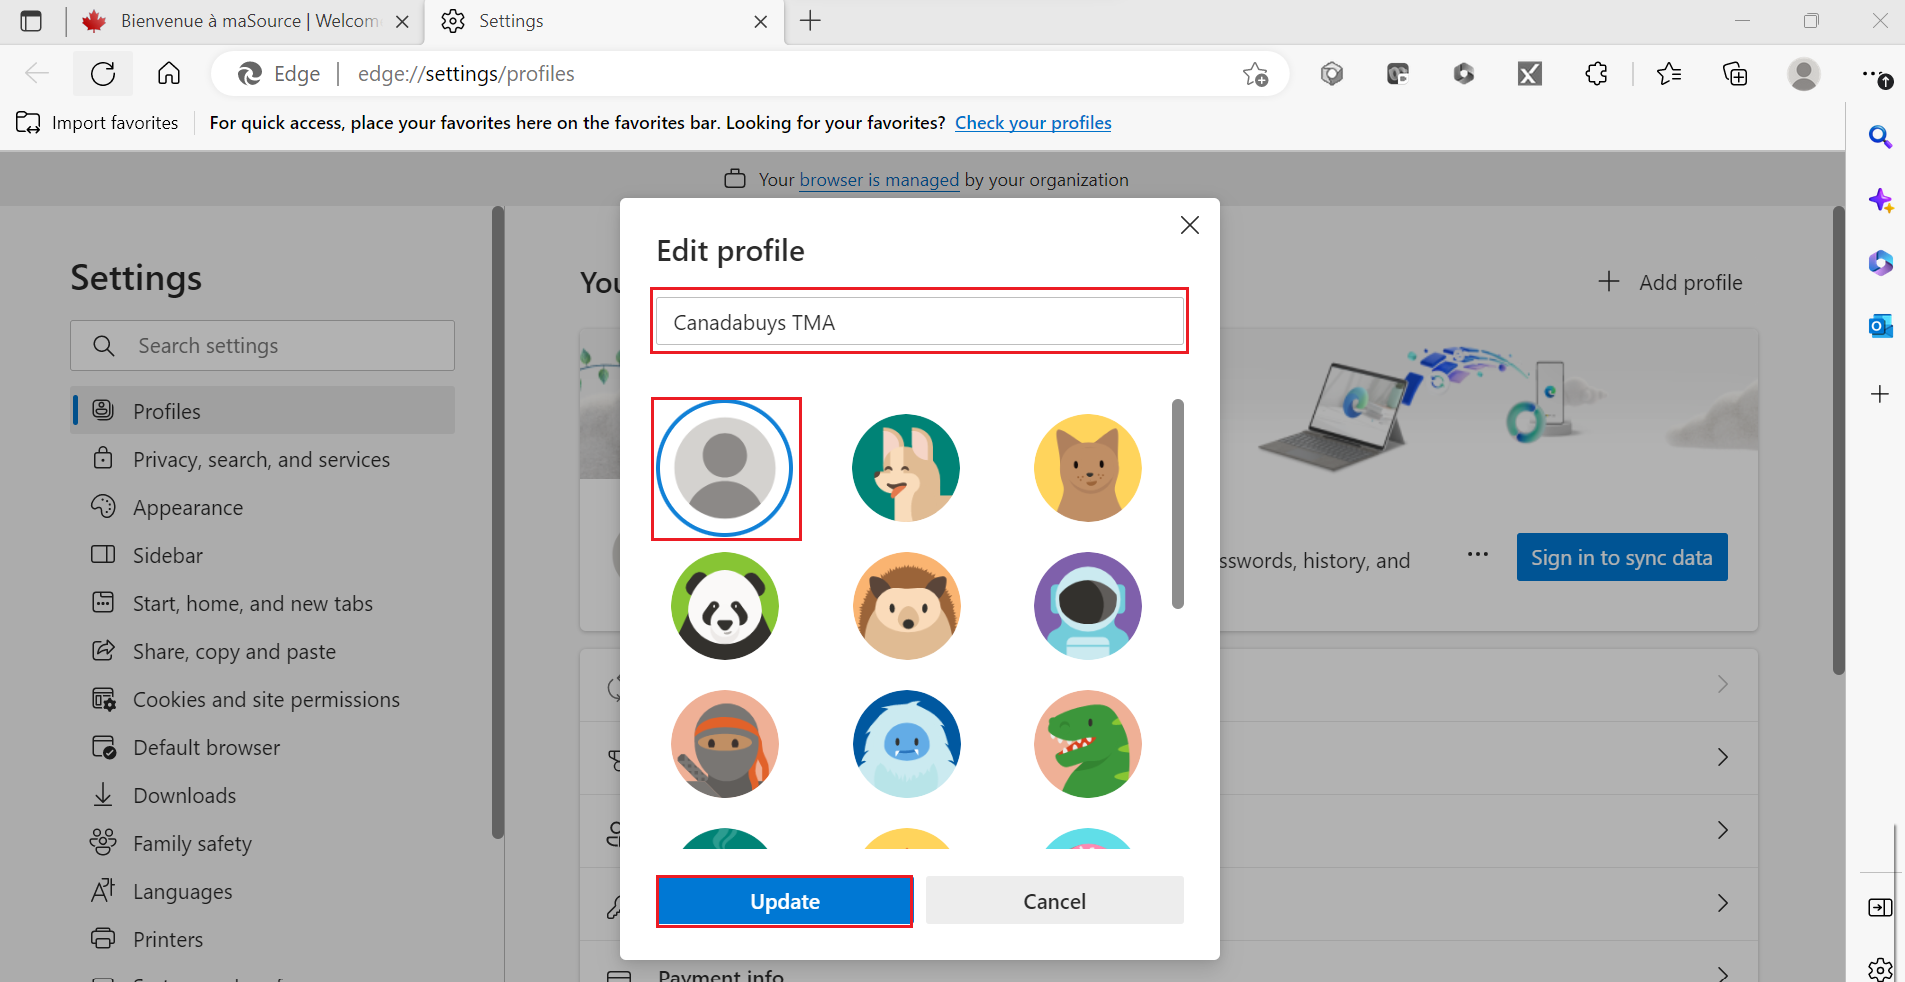 A screenshot of the “edit profile” pop-up window with the profile name field, an avatar and the update button highlighted.